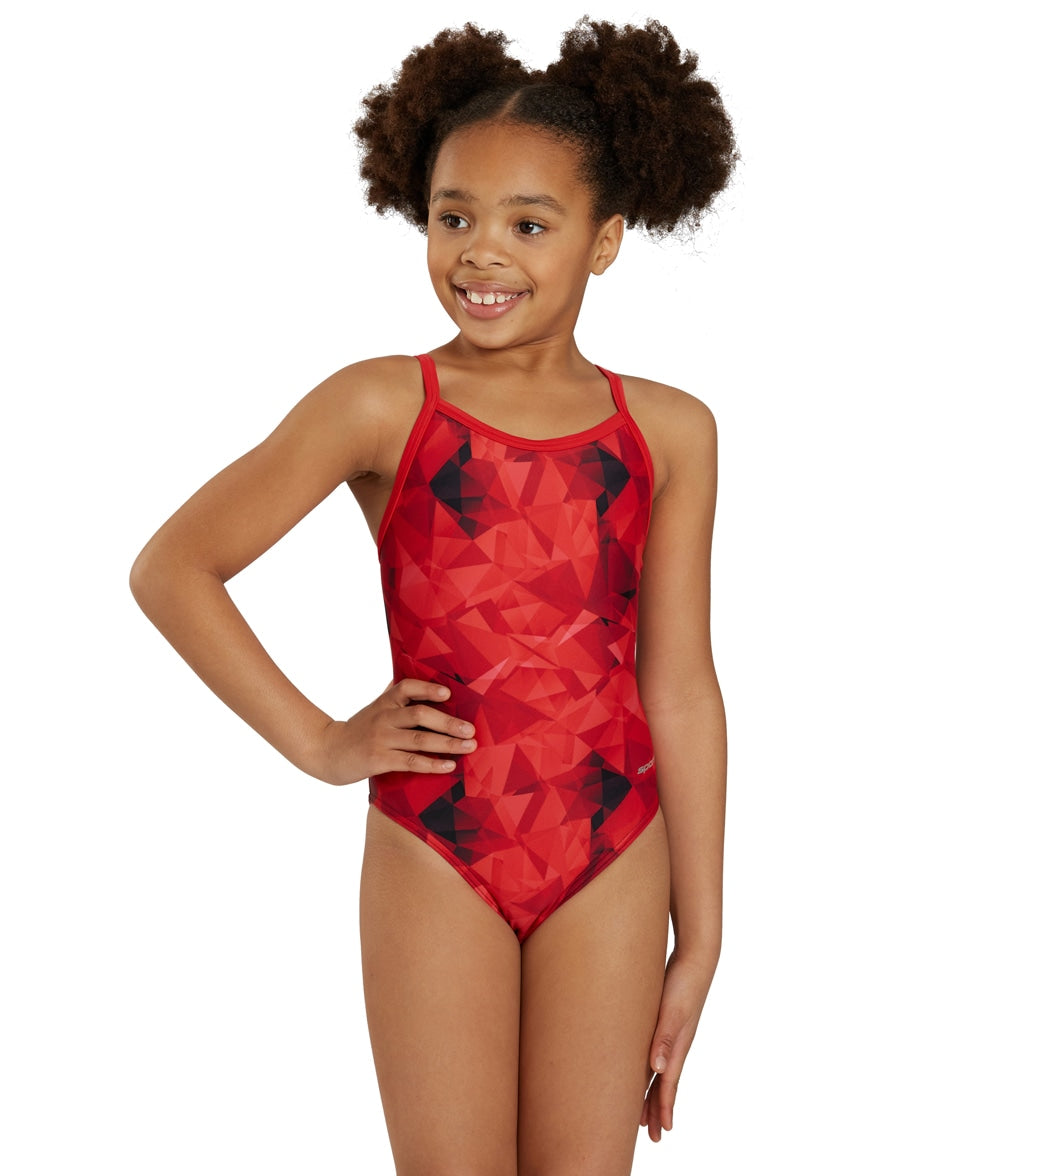 Sporti Fractalicious Thin Strap One Piece Swimsuit Youth (22 - 28)